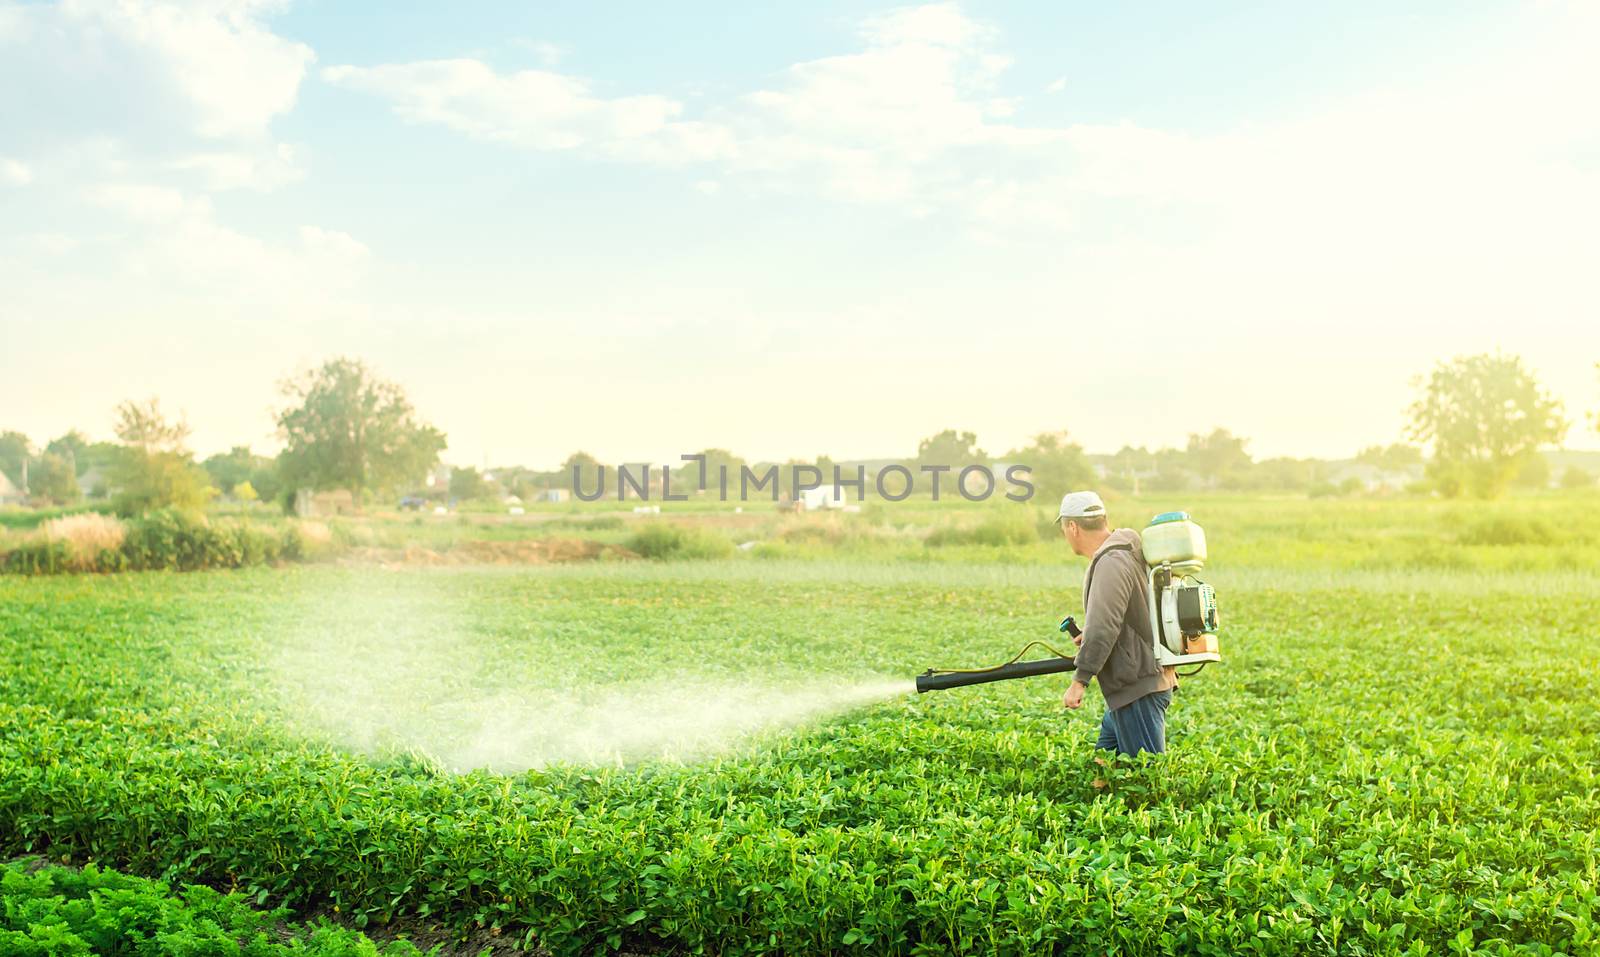 A farmer with a mist blower sprayer walks through the potato plantation. Use chemicals in agriculture. Agriculture and agribusiness. Treatment of the farm field against insect pests, fungal infections by iLixe48